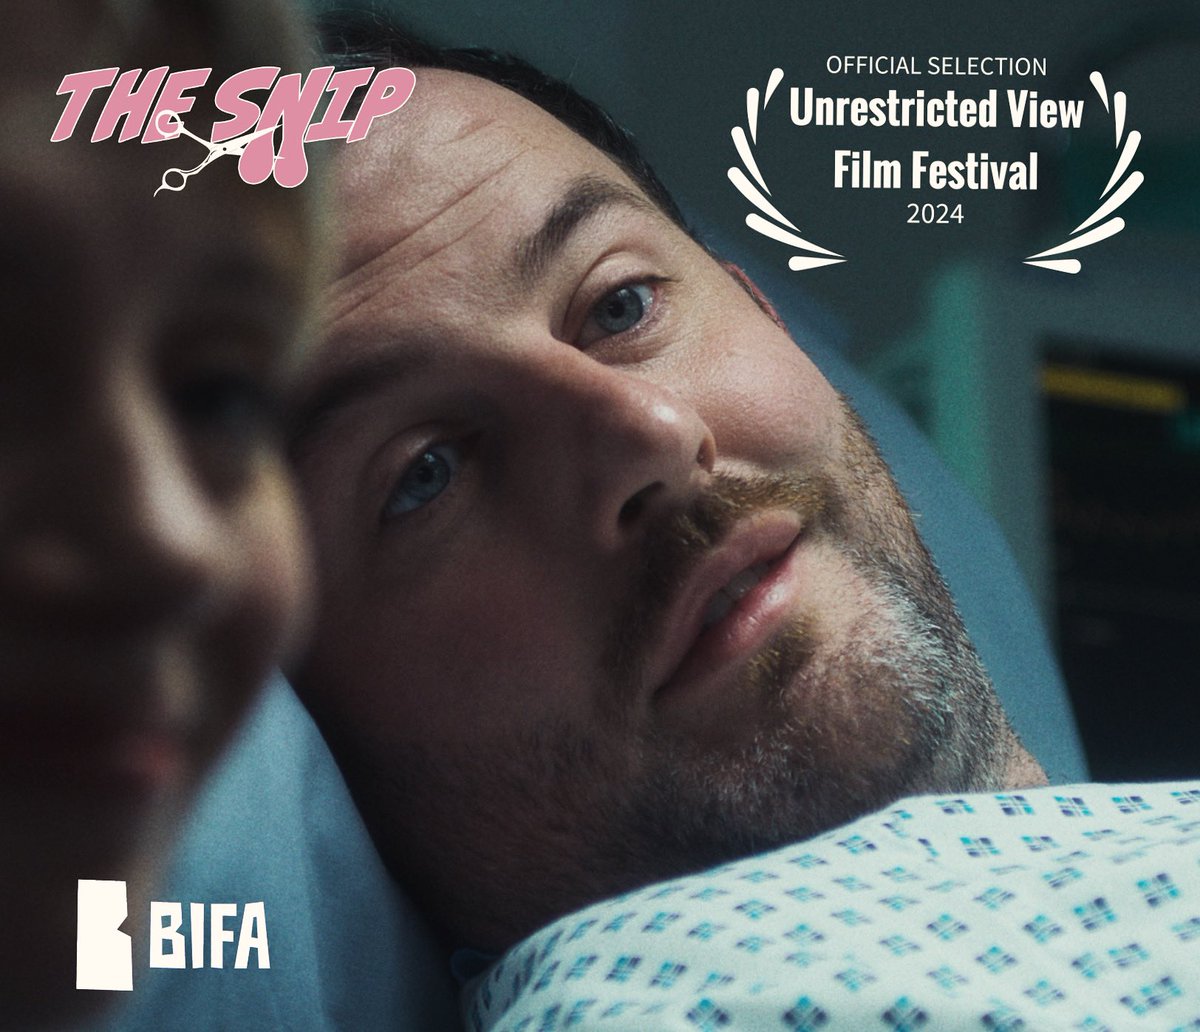 The Snip is an Official Selection at @BIFA_film qualifying @UViewFF. Excited for another London screening. Thanks to the fest and thanks to the amazing cast and crew.